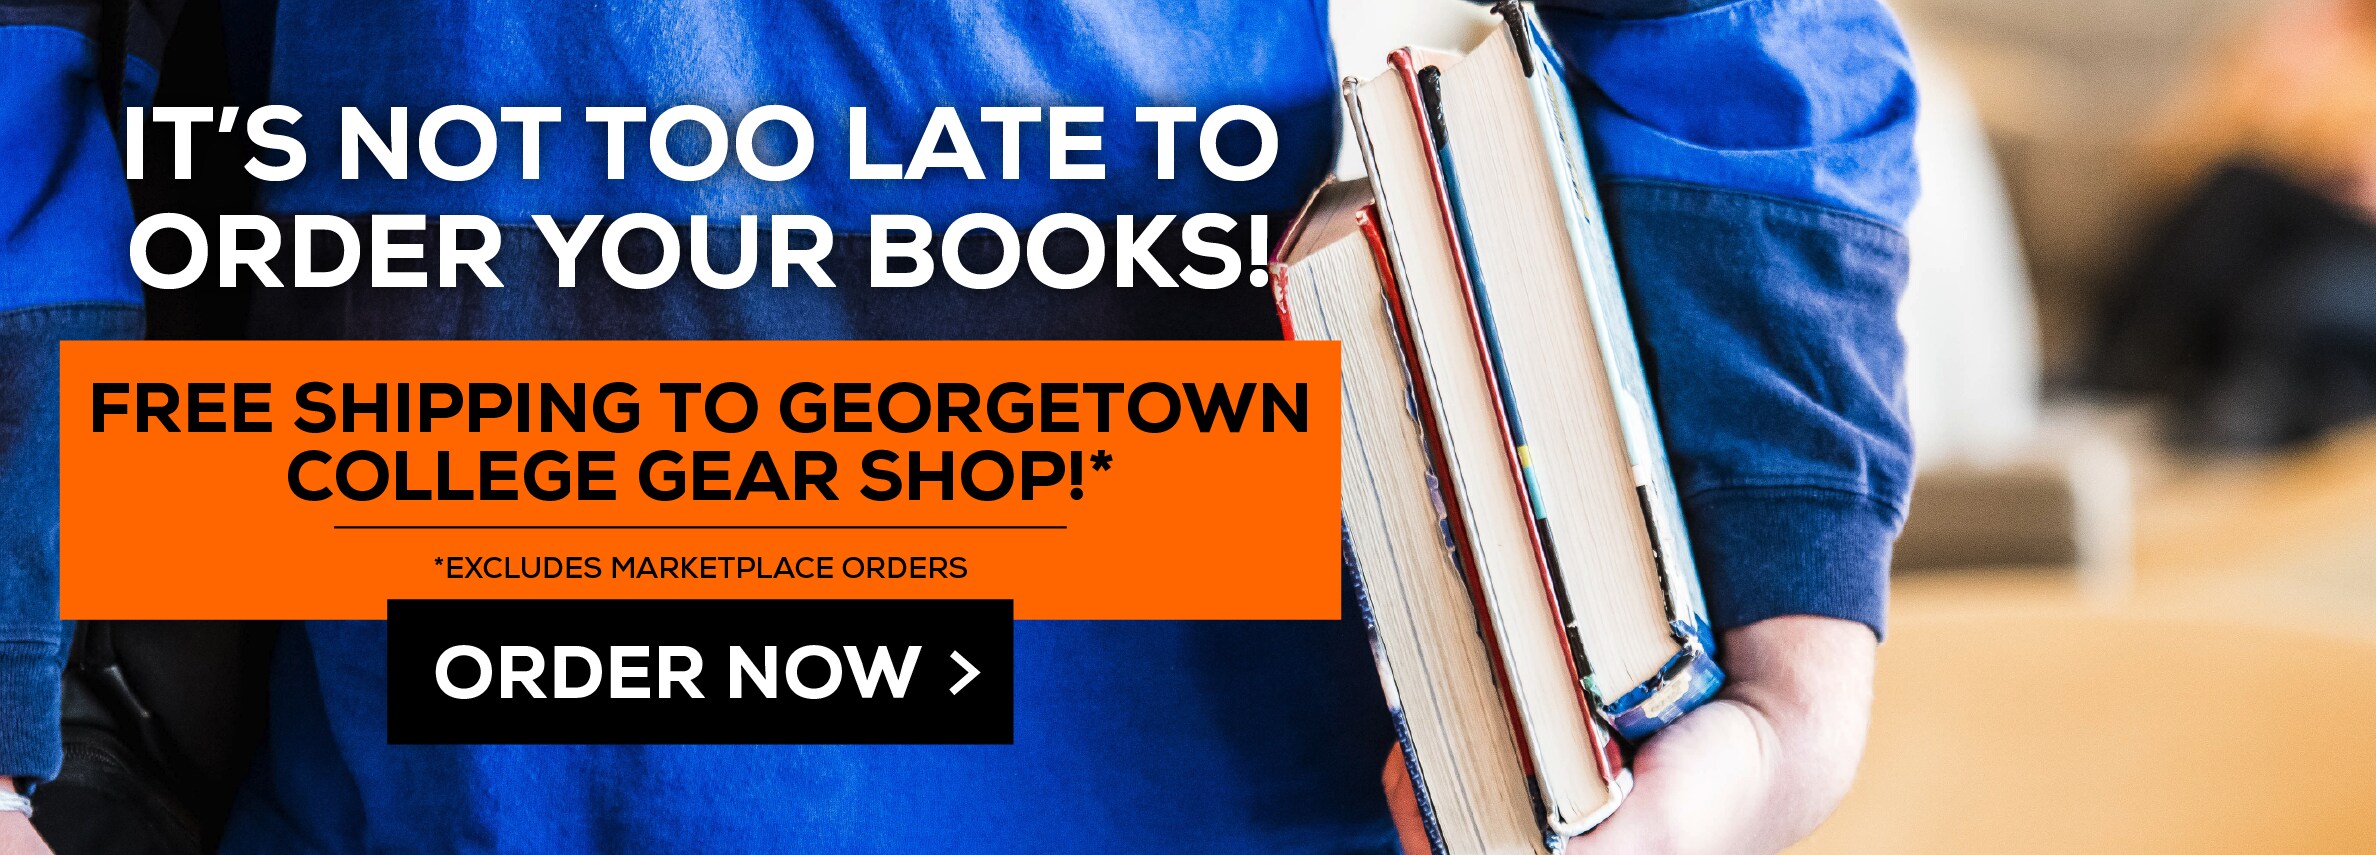 ItÃ¢â‚¬â„¢s not too late to order your books! Free shipping to Georgetown College Gear Shop!* Excludes marketplace purchases. Order Now.